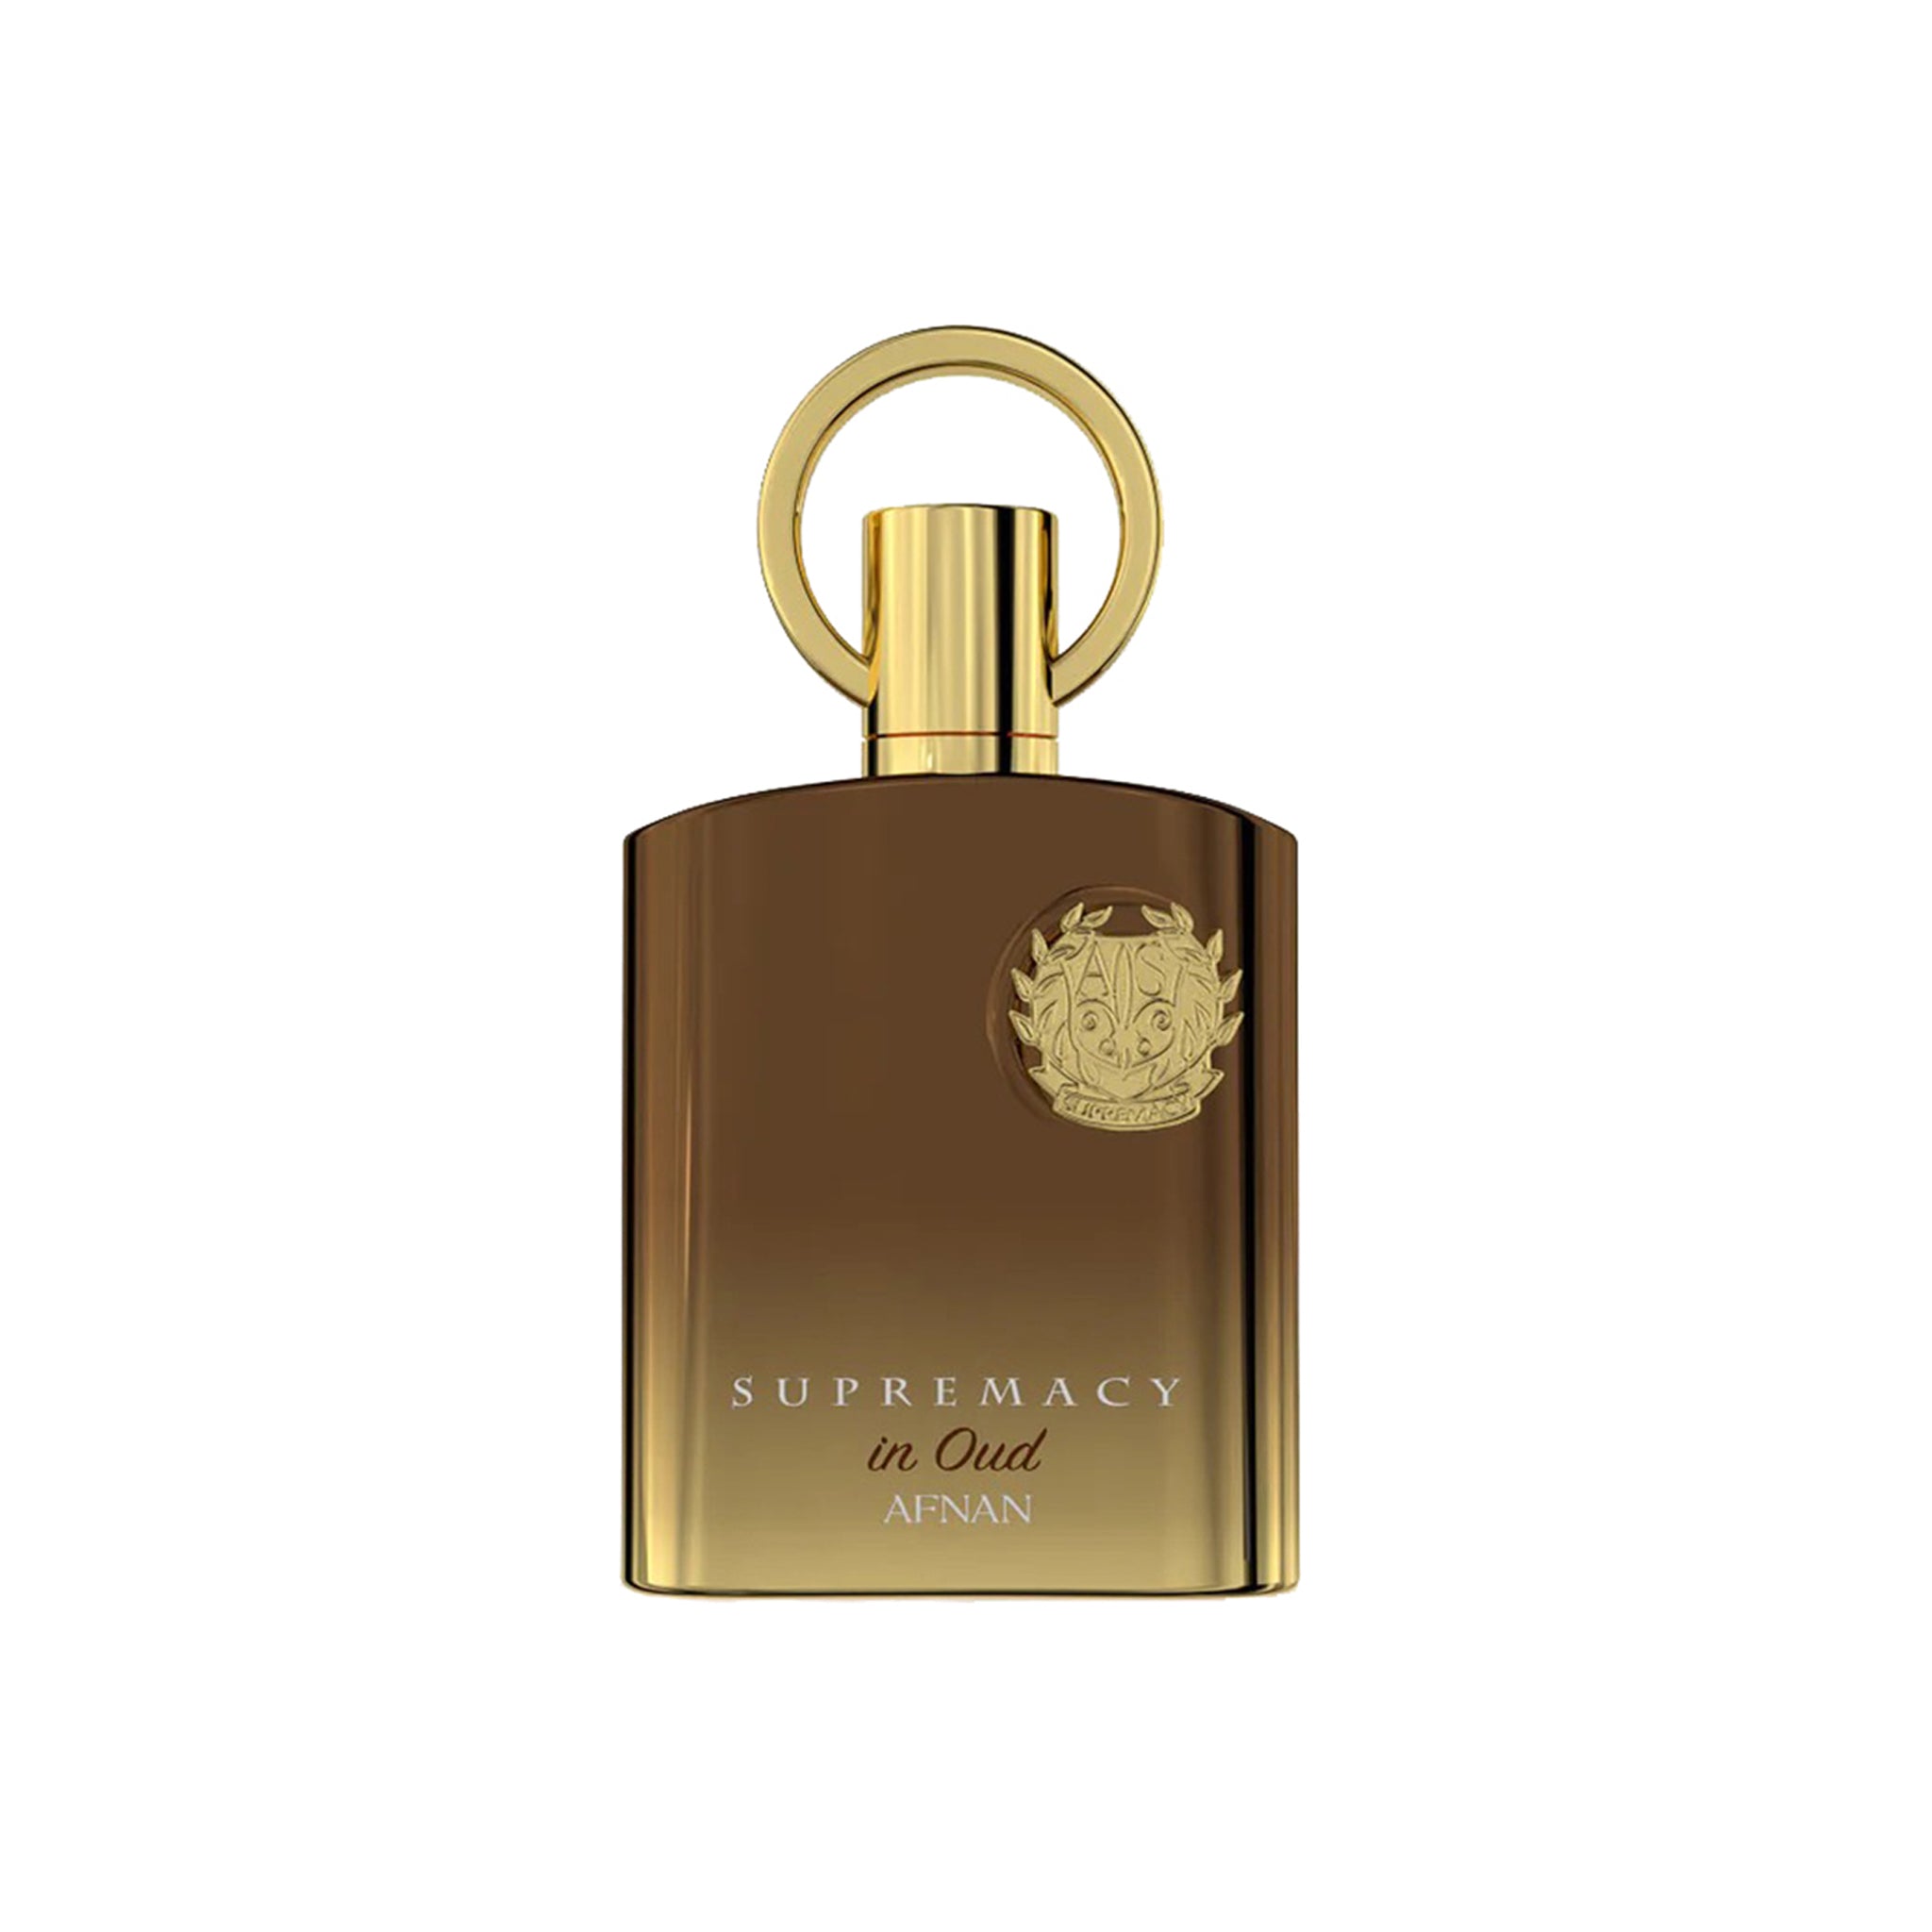 Supremacy In Oud 100ml EDP by Afnan